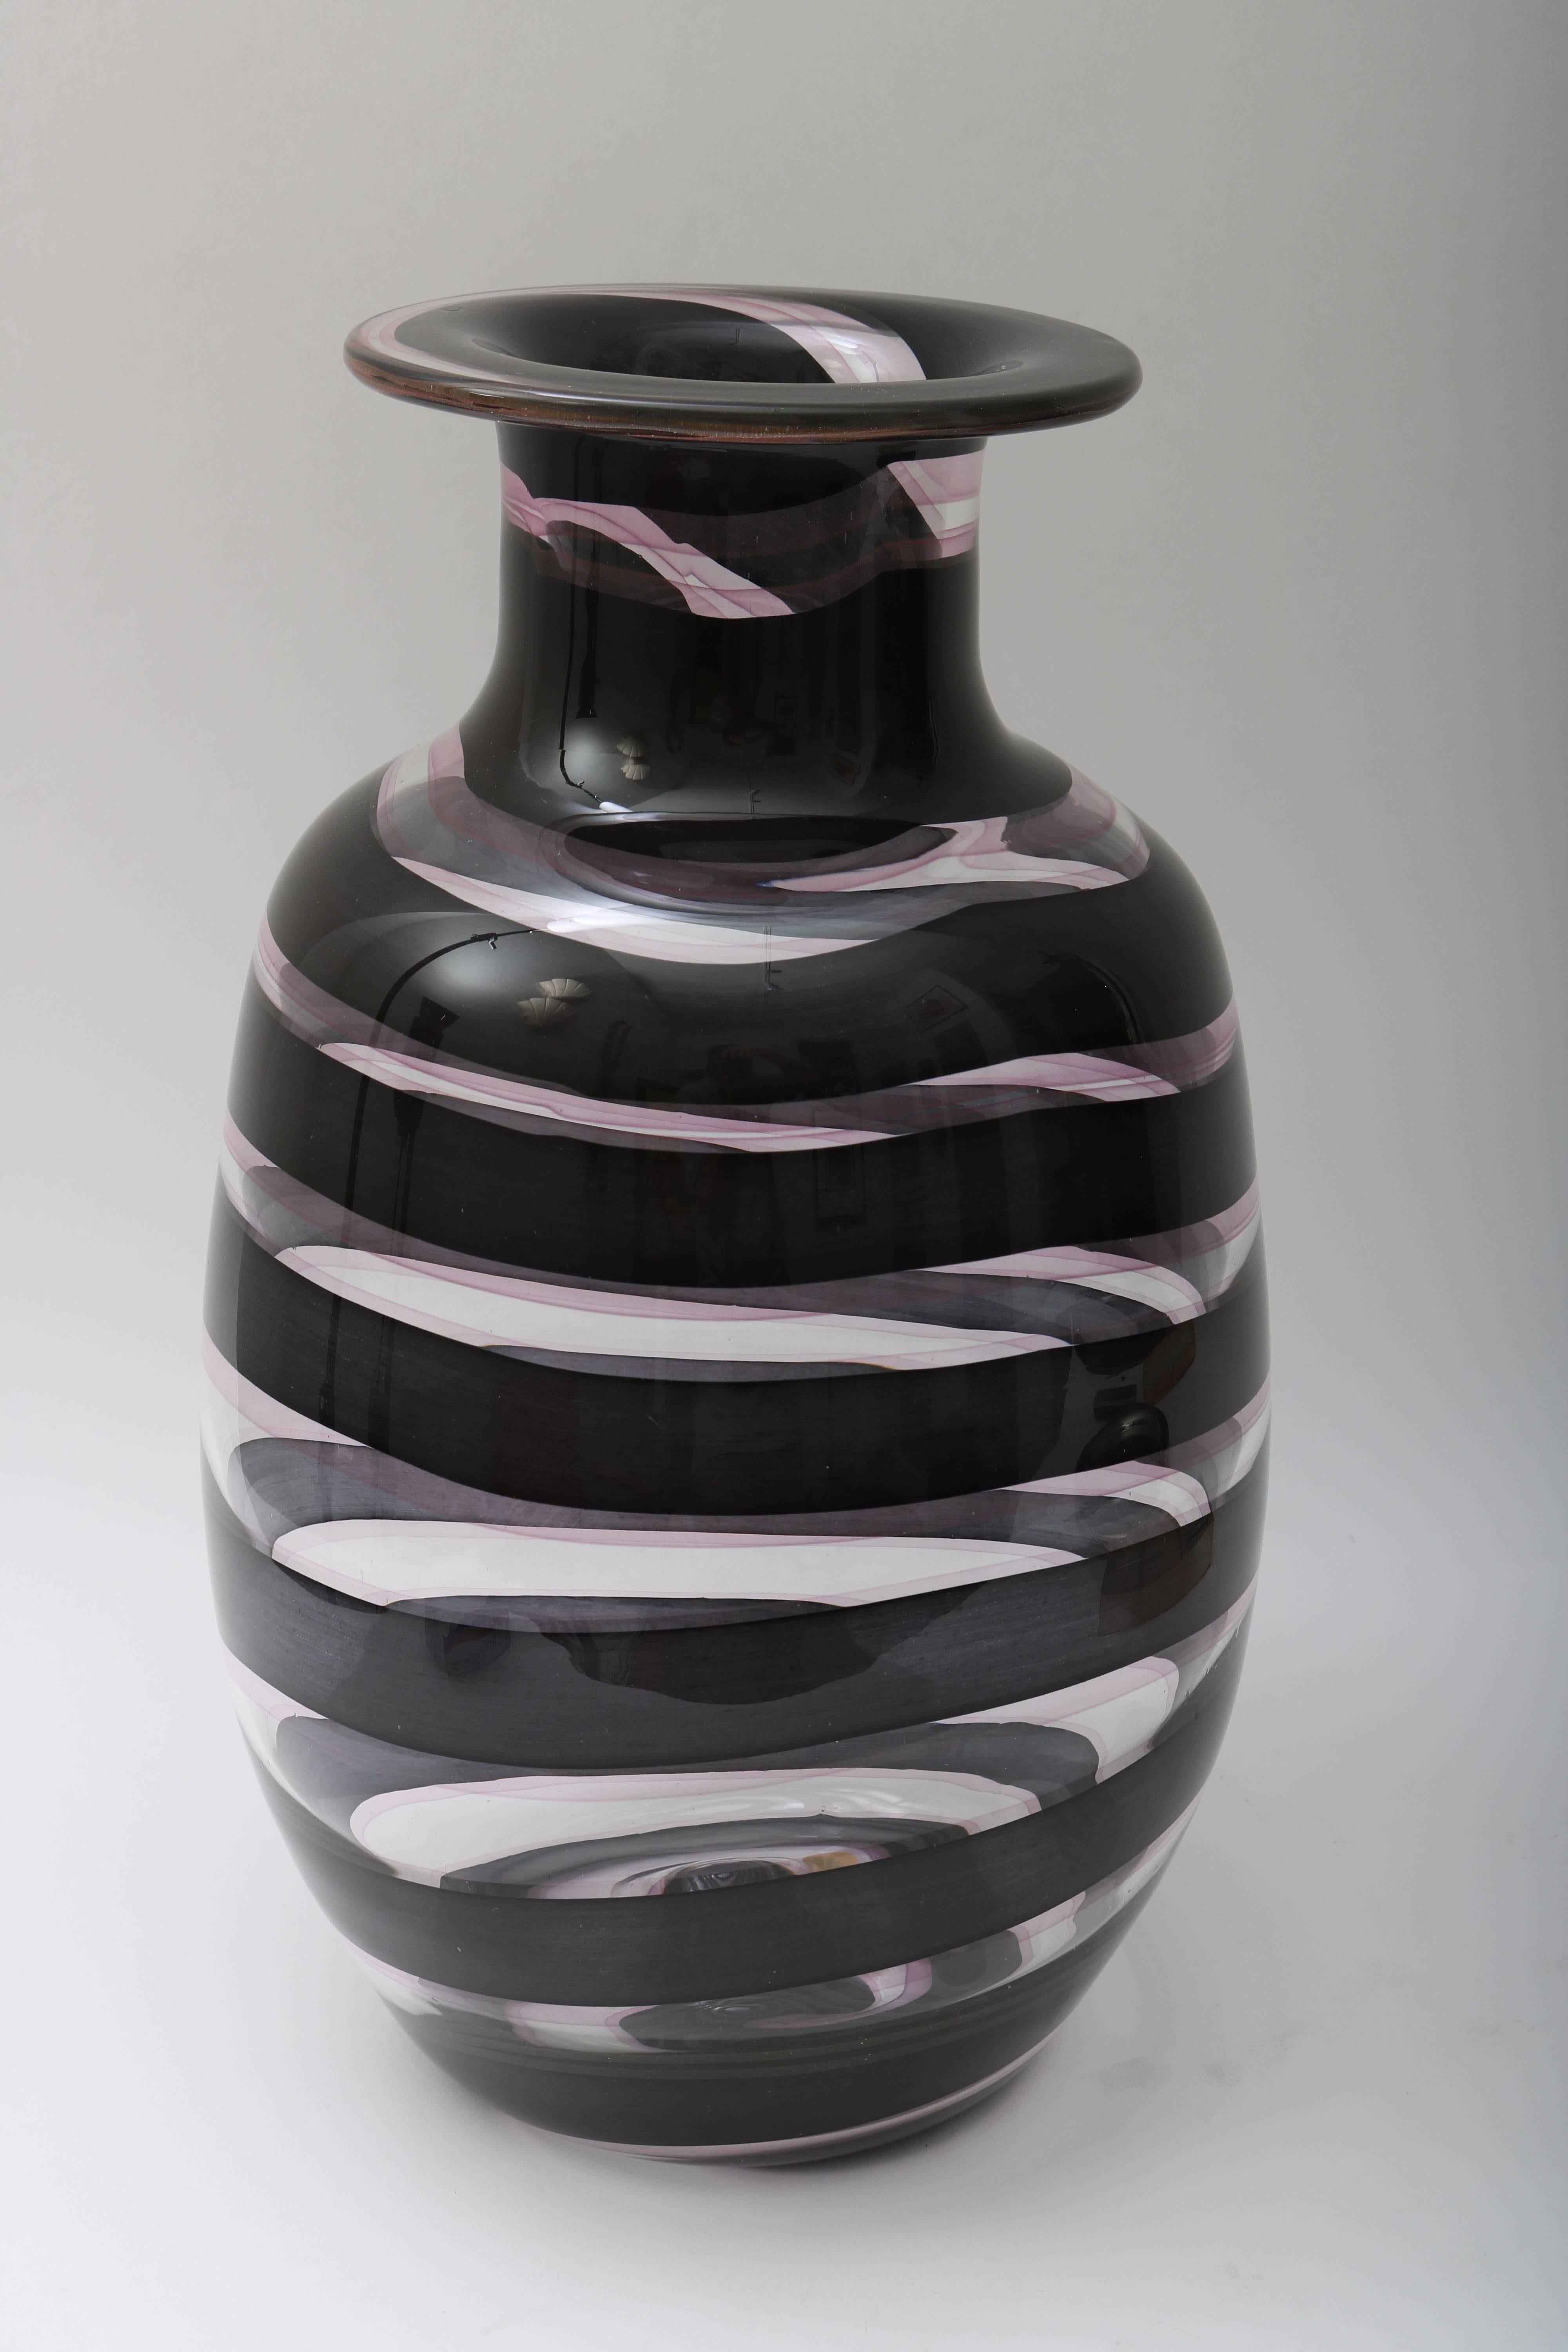 This large-scale Murano glass vase was recently acquired from a Palm Beach estate and dates to the 1980s. The dark aubergine swirl pattern works beautifully with the clear and translucent colors.

For best net trade price or additional questions